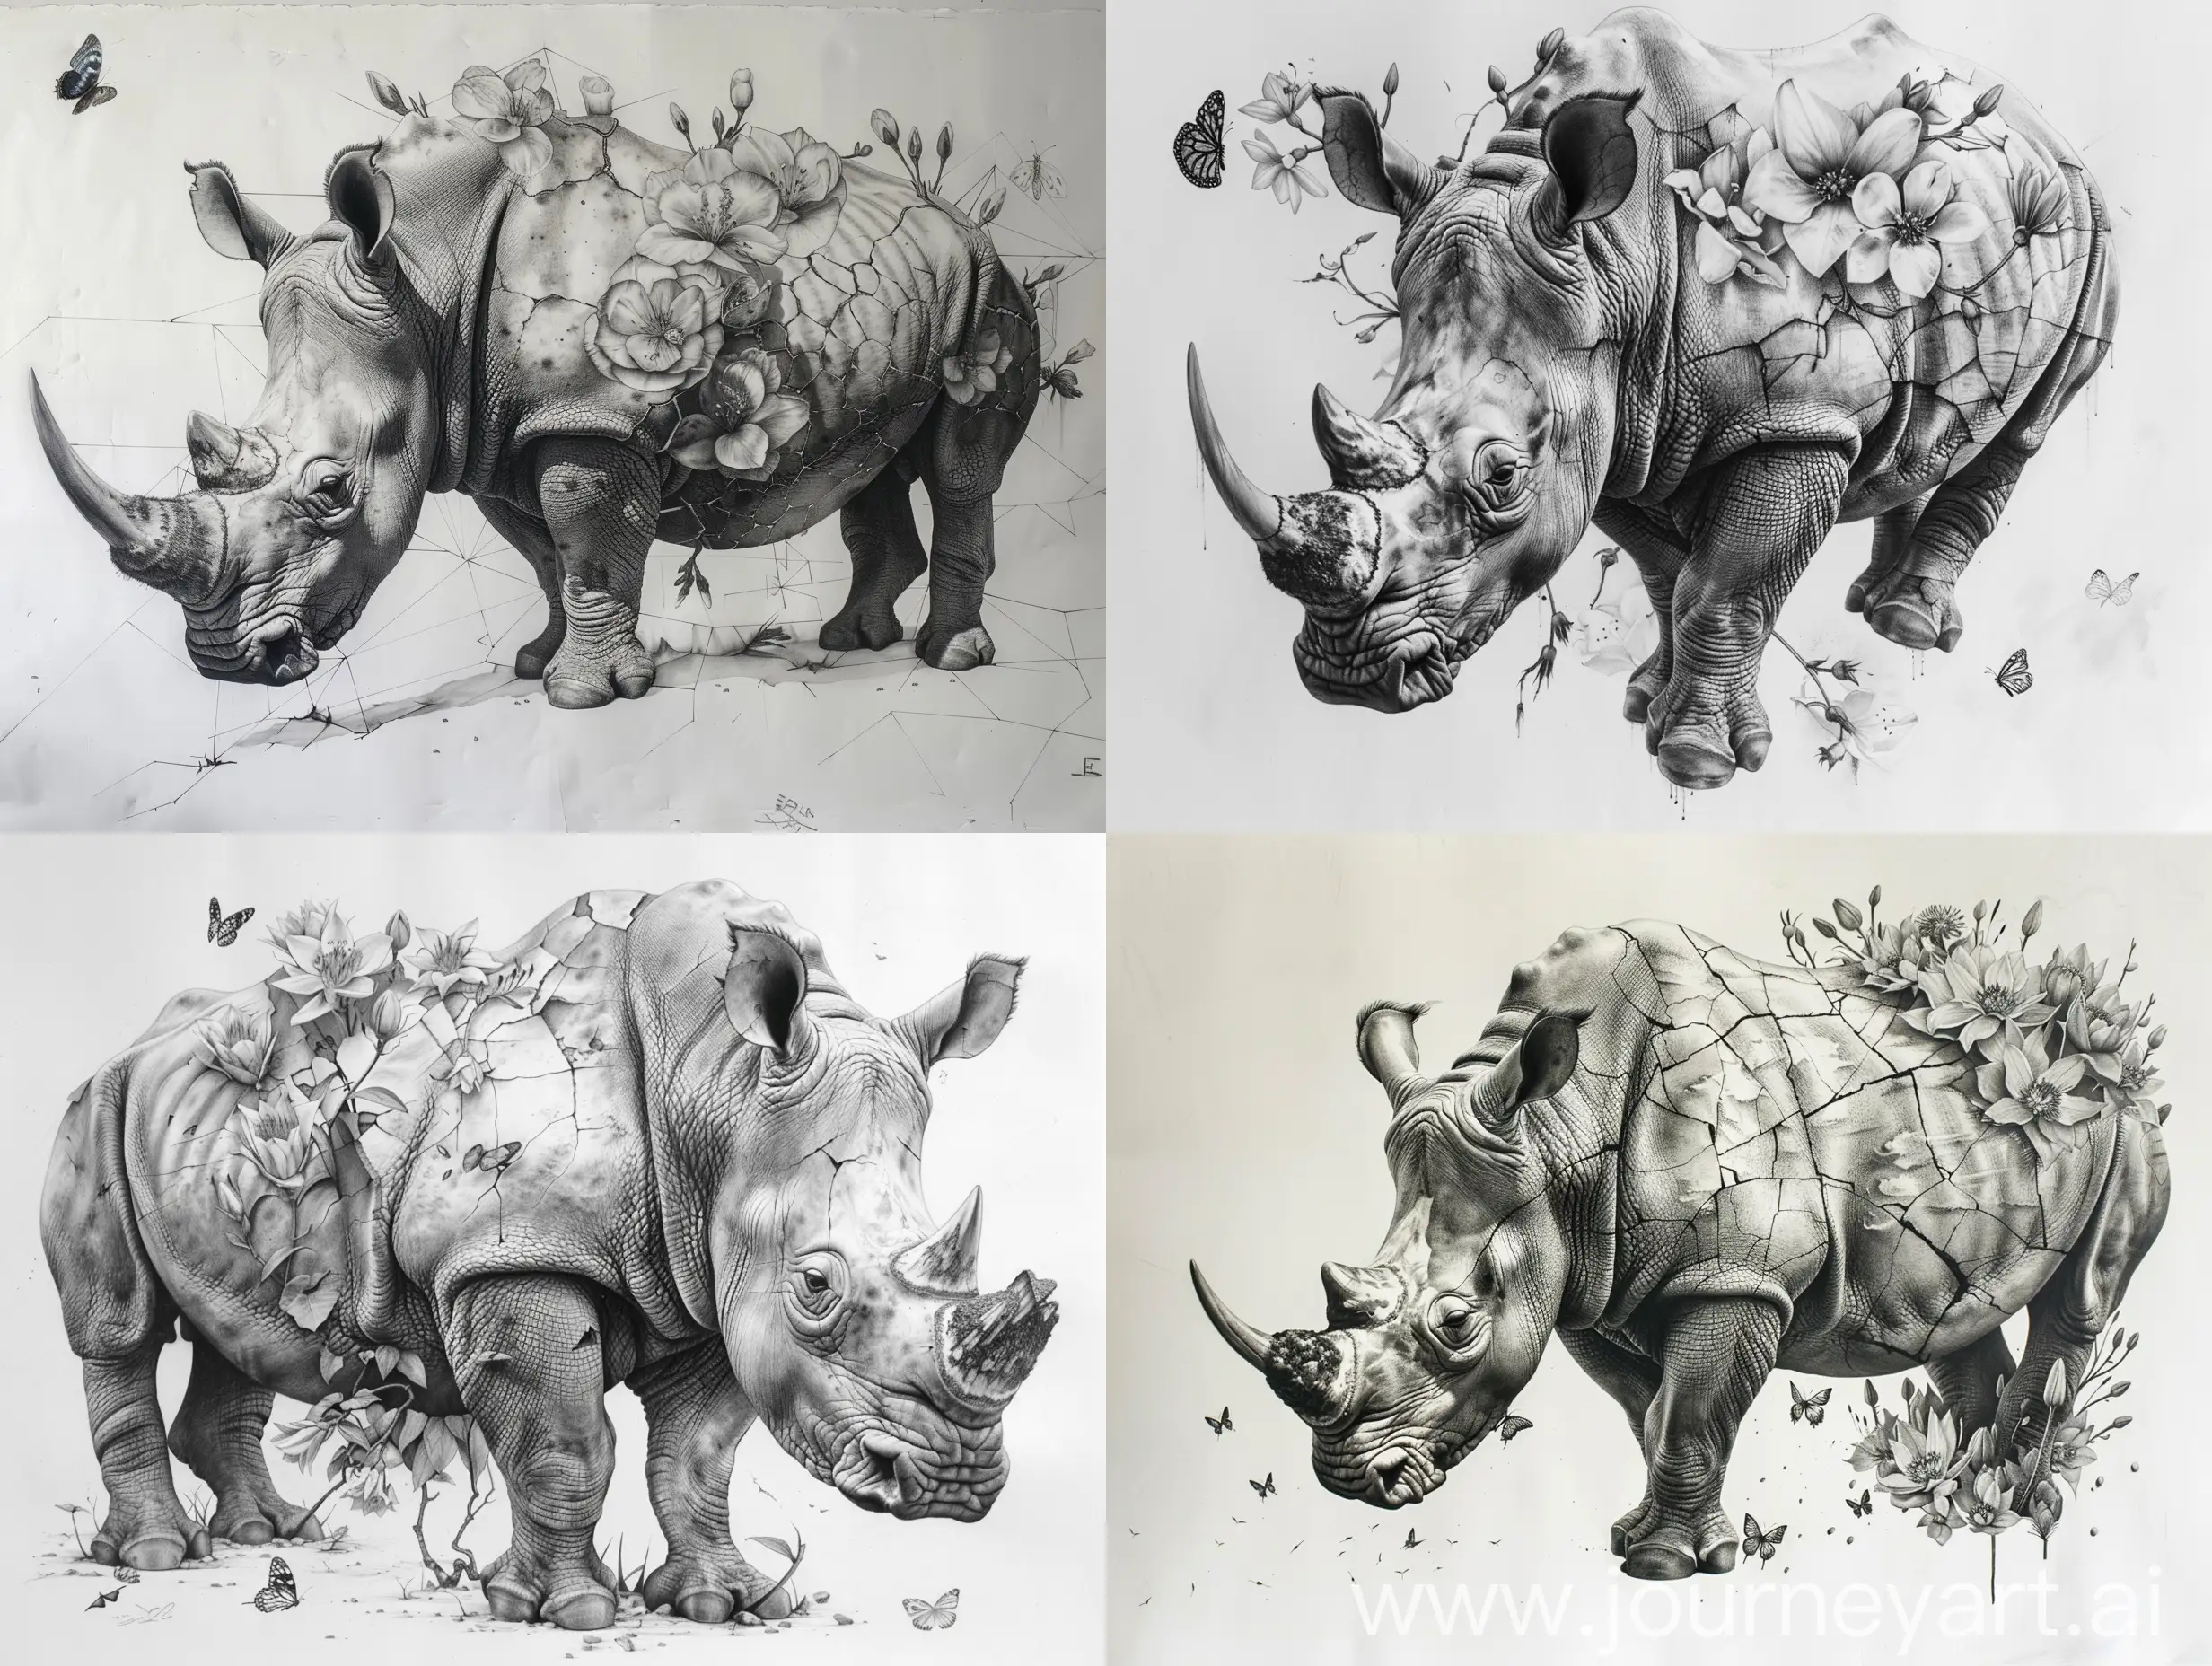 genre creative dark hyper realistic pencil sketch of a rhino on prism like surface, the upper body of the rhino is cracking and from those cracks flowers are growing and butterflies are coming out, on a large canvas in great fine details with white background

